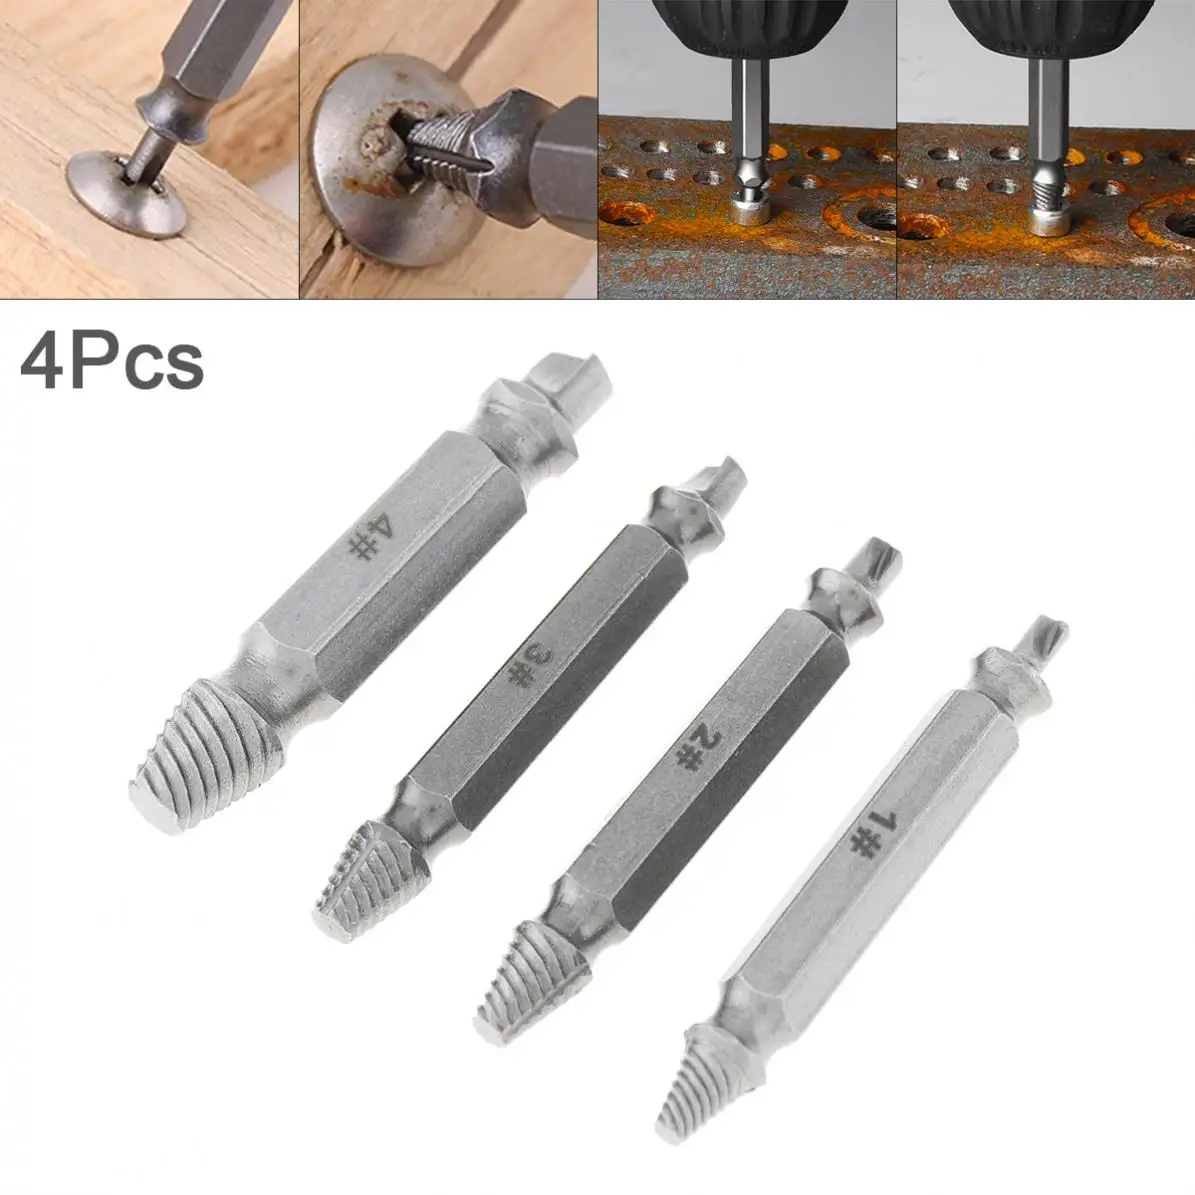 

4pcs/set S2 Alloy Steel Screw Extractor Drill Bit Tools with Hexagon Handle and Double Side for Broken/Damaged Bolt Stud